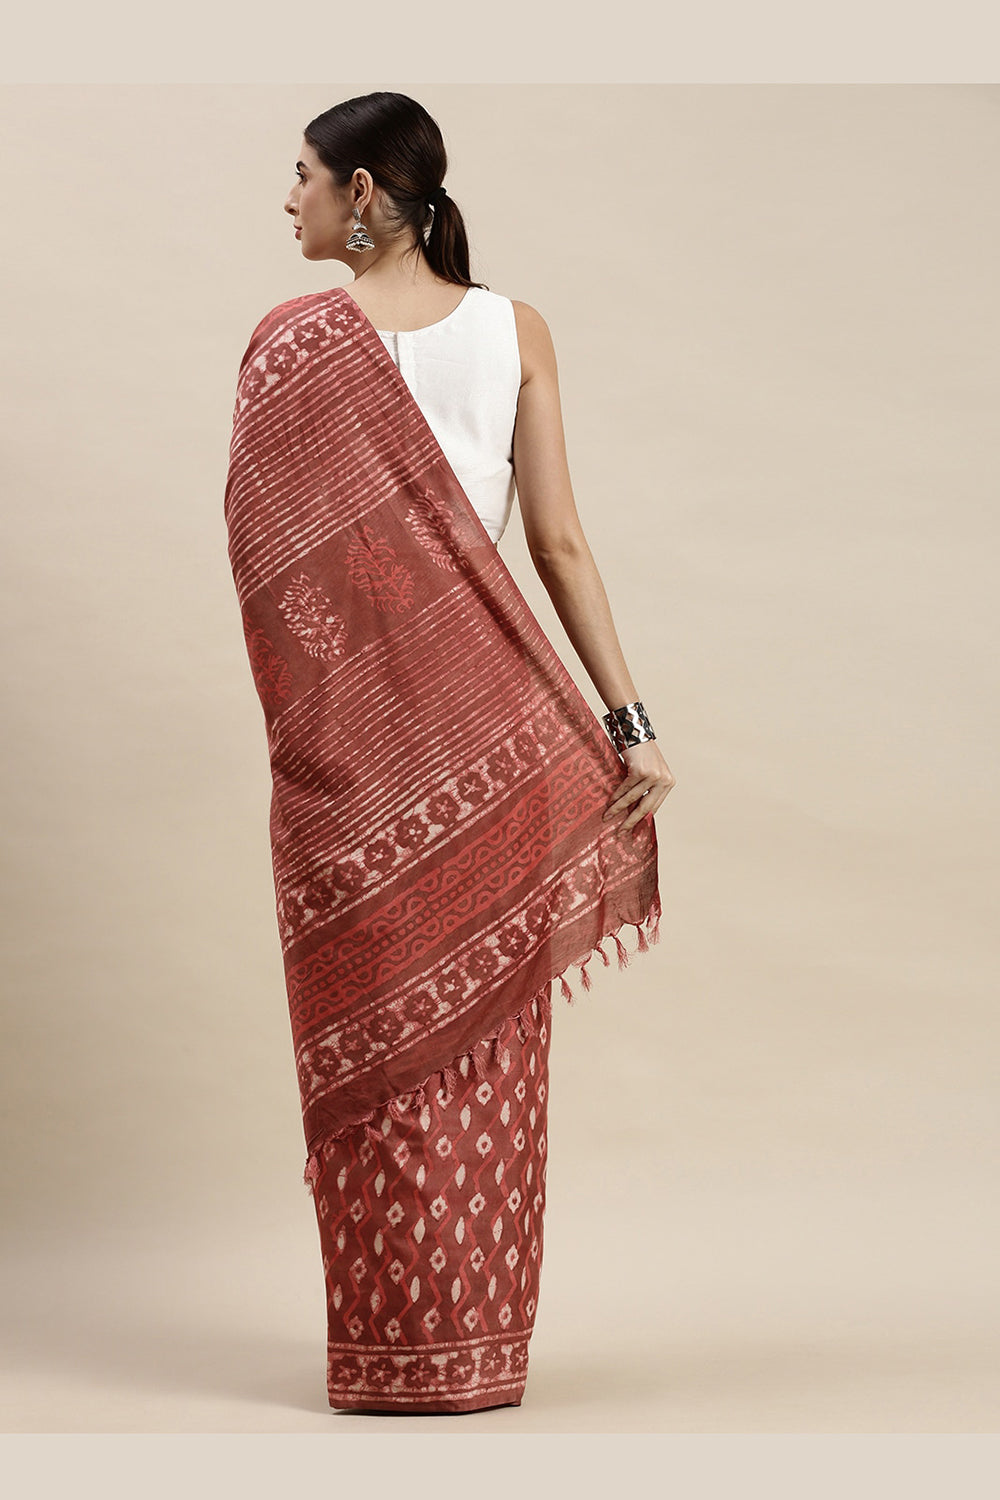 Shop Chloe Brown Batik Print Art Silk One Minute Saree at best offer at our  Store - One Minute Saree